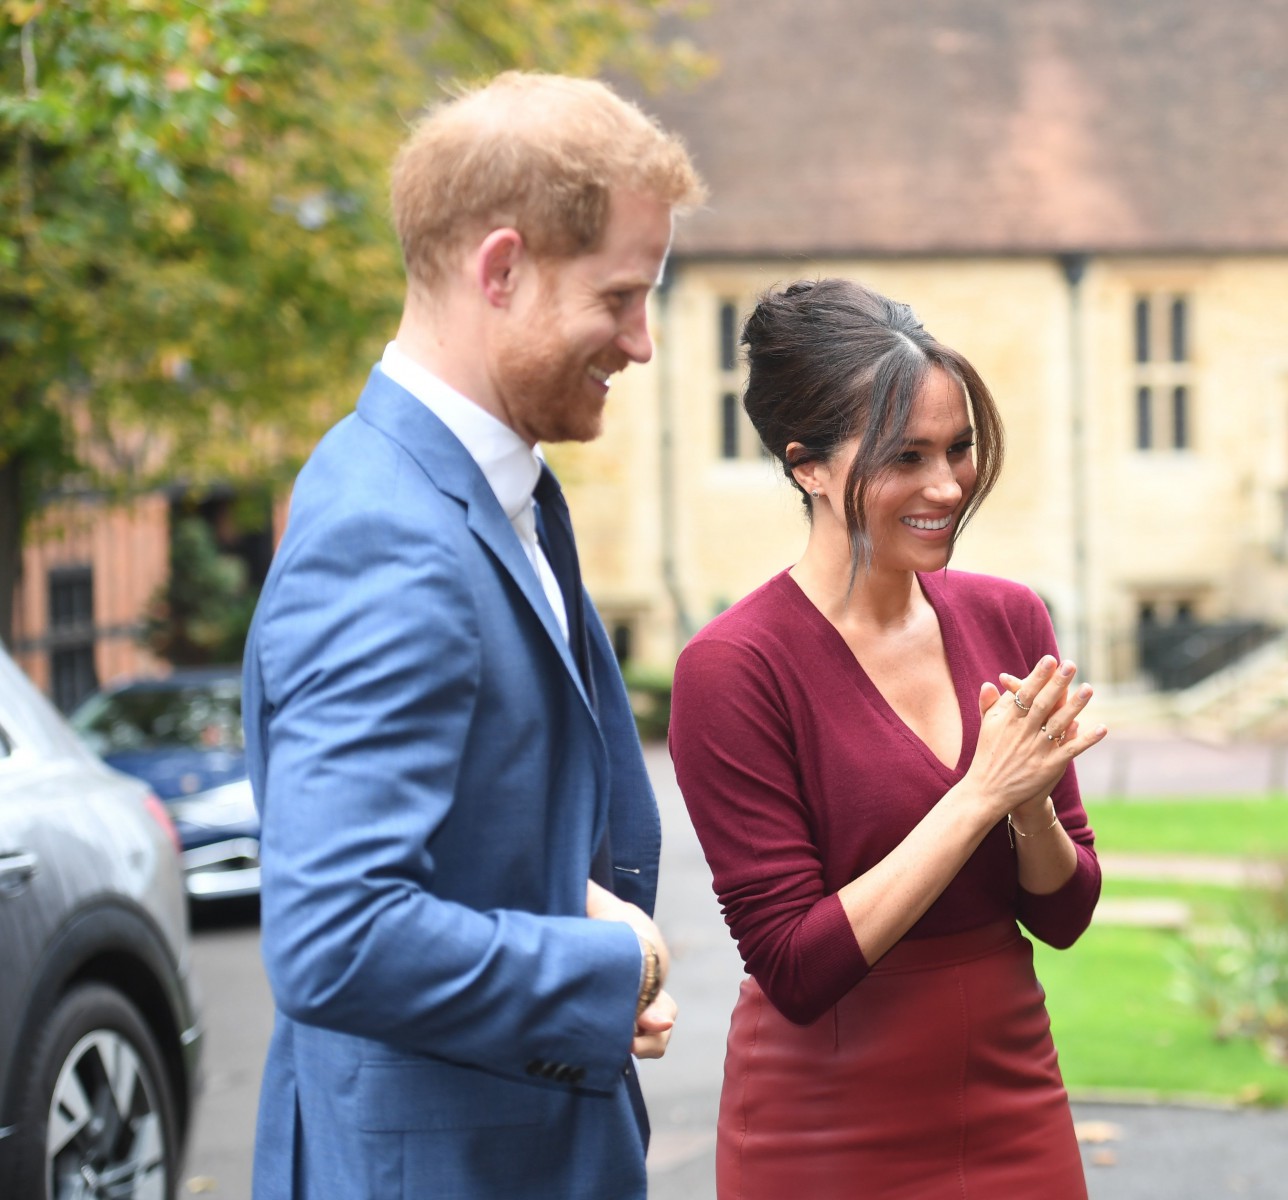 Meghan Markle and Prince Harry are said to be working on the US launch of Sussex Royal